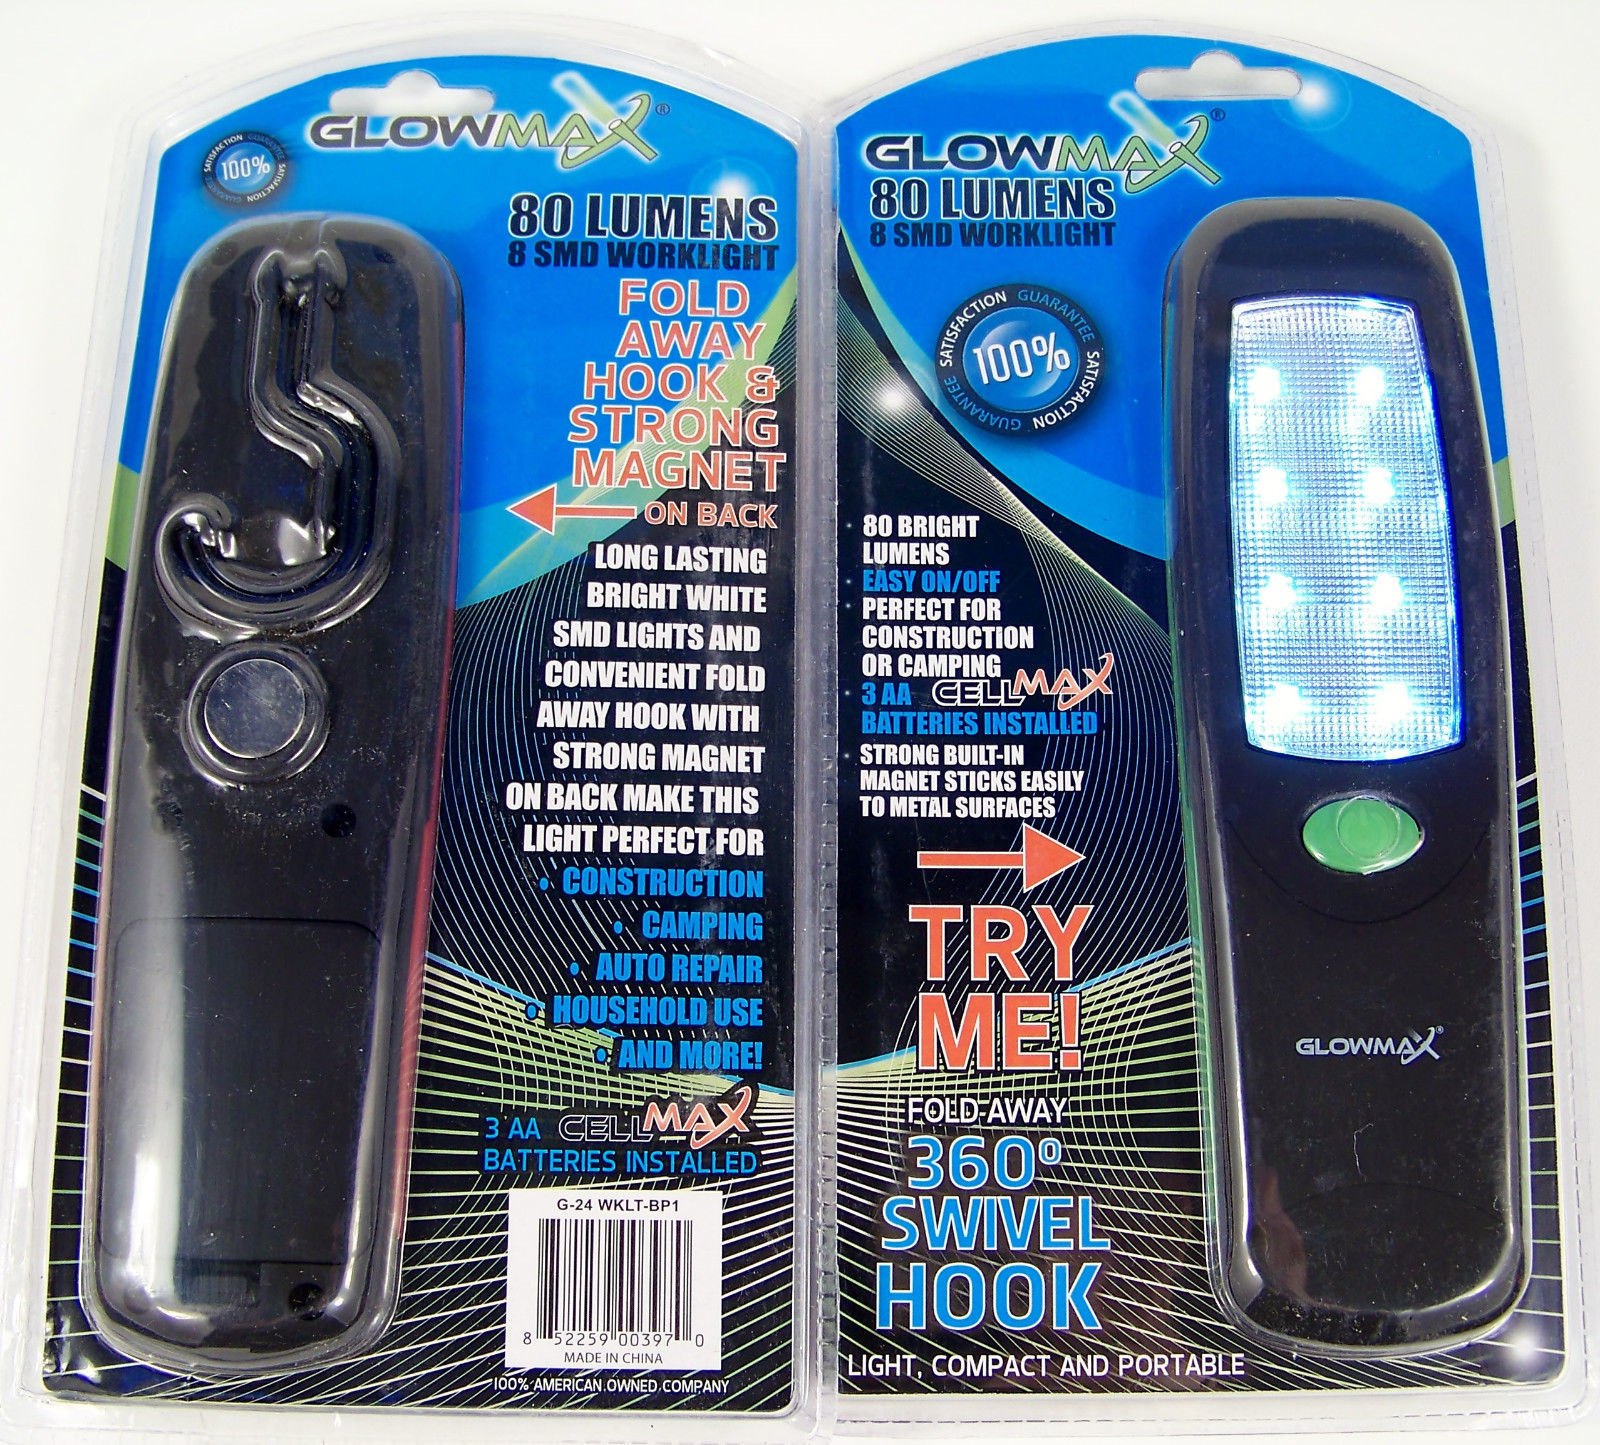 LED PORTABLE CORDLESS WORK LIGHT Flashlight with HANGER HOOK and Magnet Glow Max - $5.00